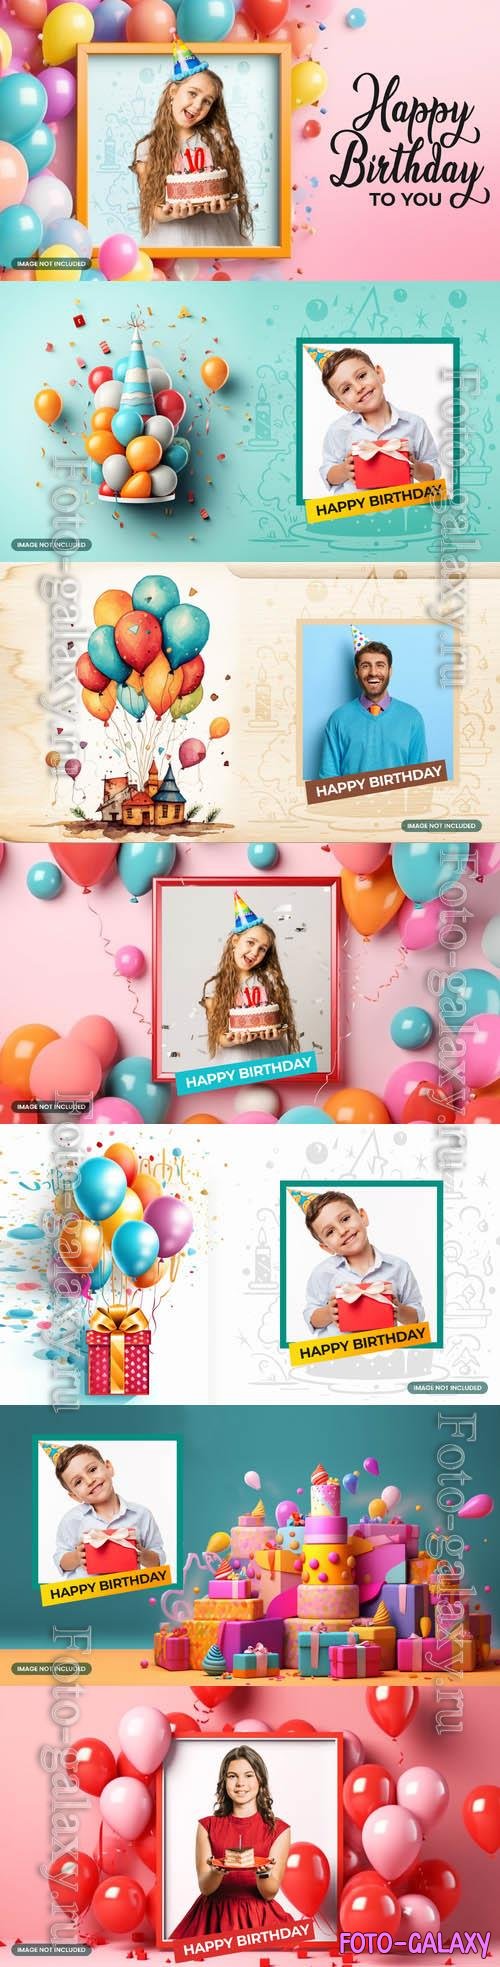 Happy birthday psd backgrounds with balloons and photo frame